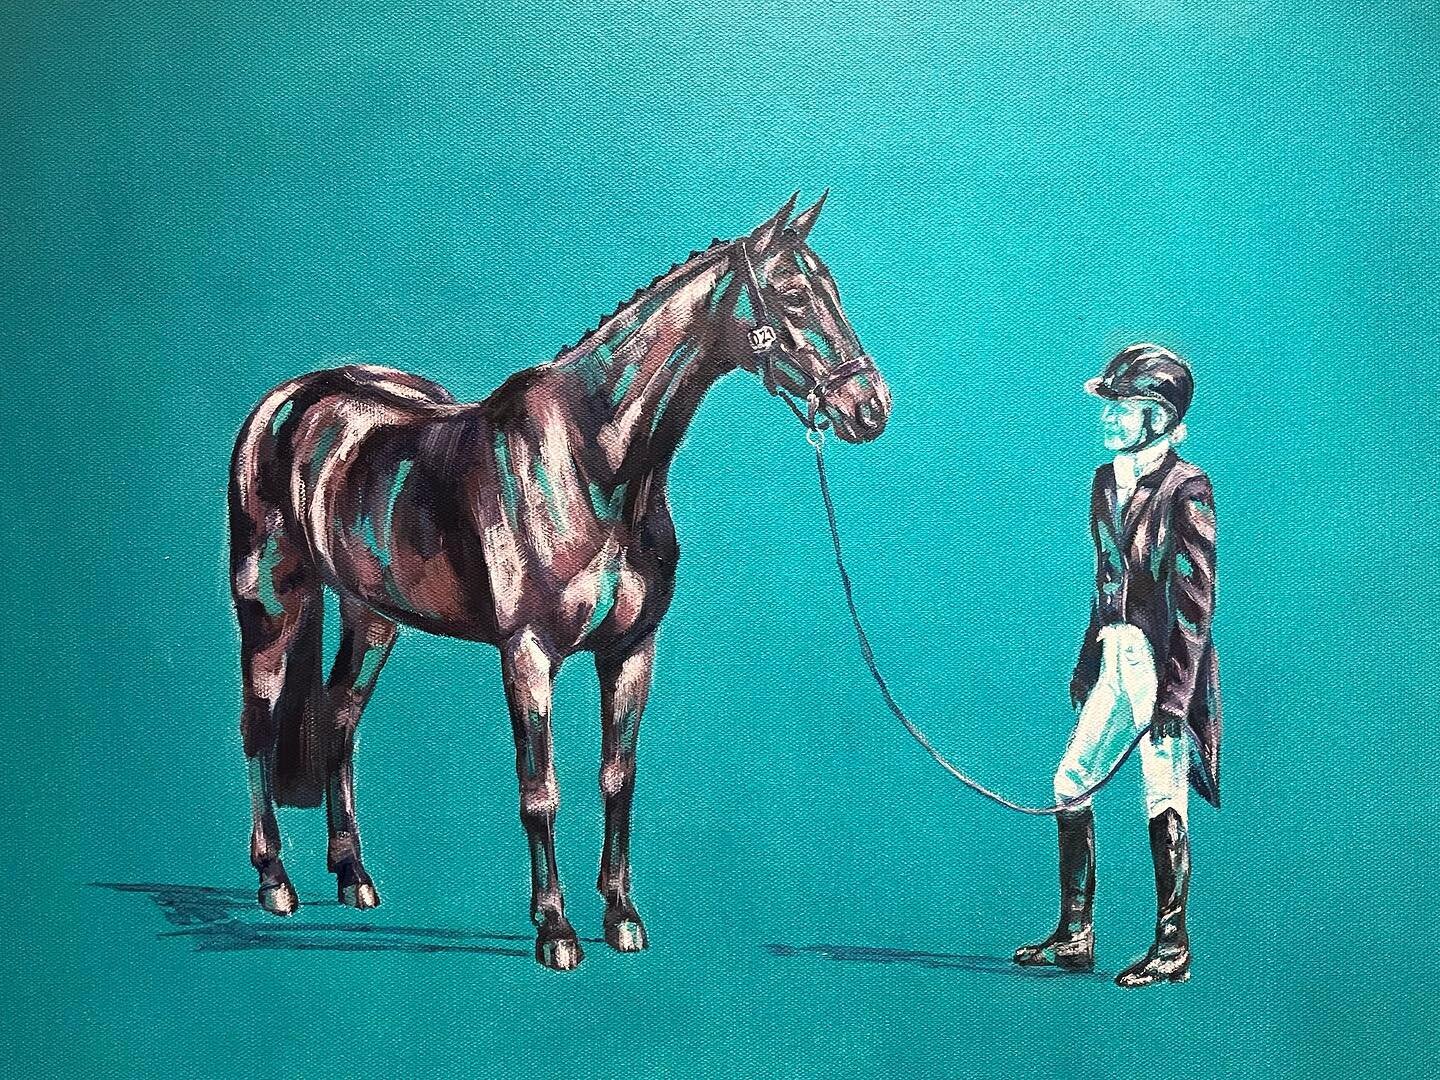 Another unique commission for @lily.mawby &lsquo;s Birthday. Working with a new colourway this time, I am so pleased with how this turned out. #commission #birthdaypresent #unique #painting #oilpainting #limitedcolourpalette #artist #equestrianart #n